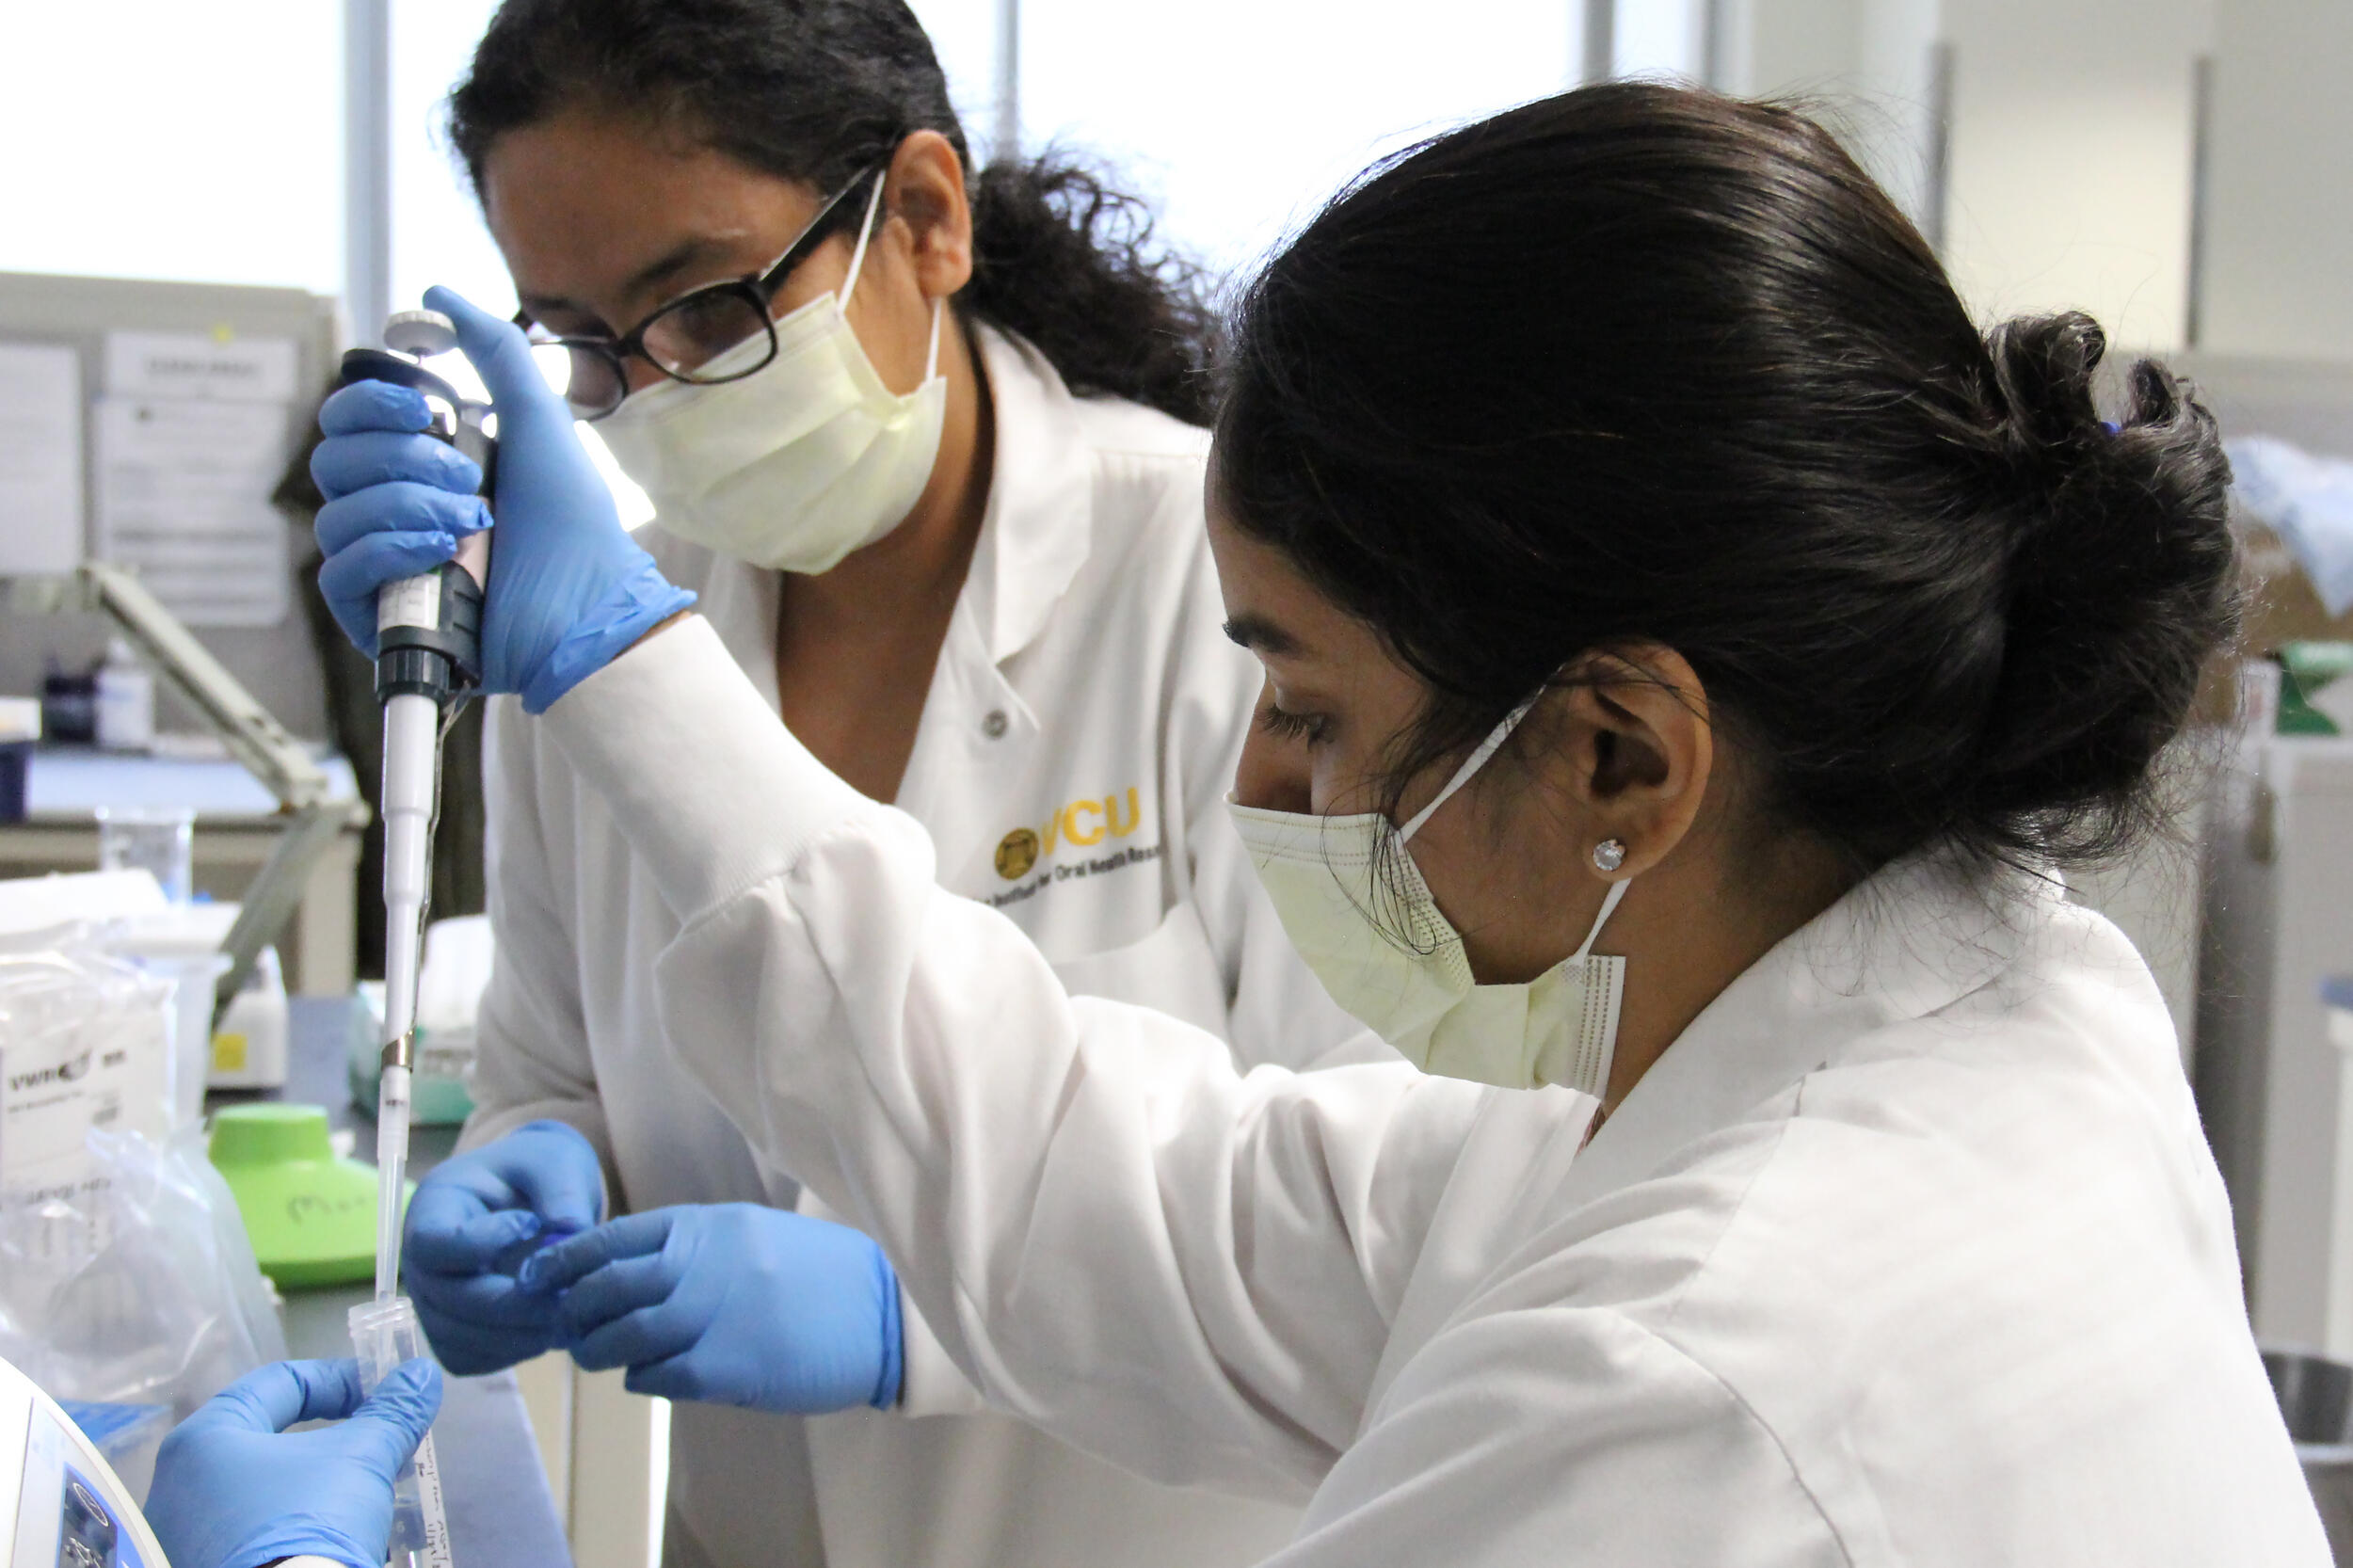 Two women wearing lab coats, facemasks, and rubber glovers working